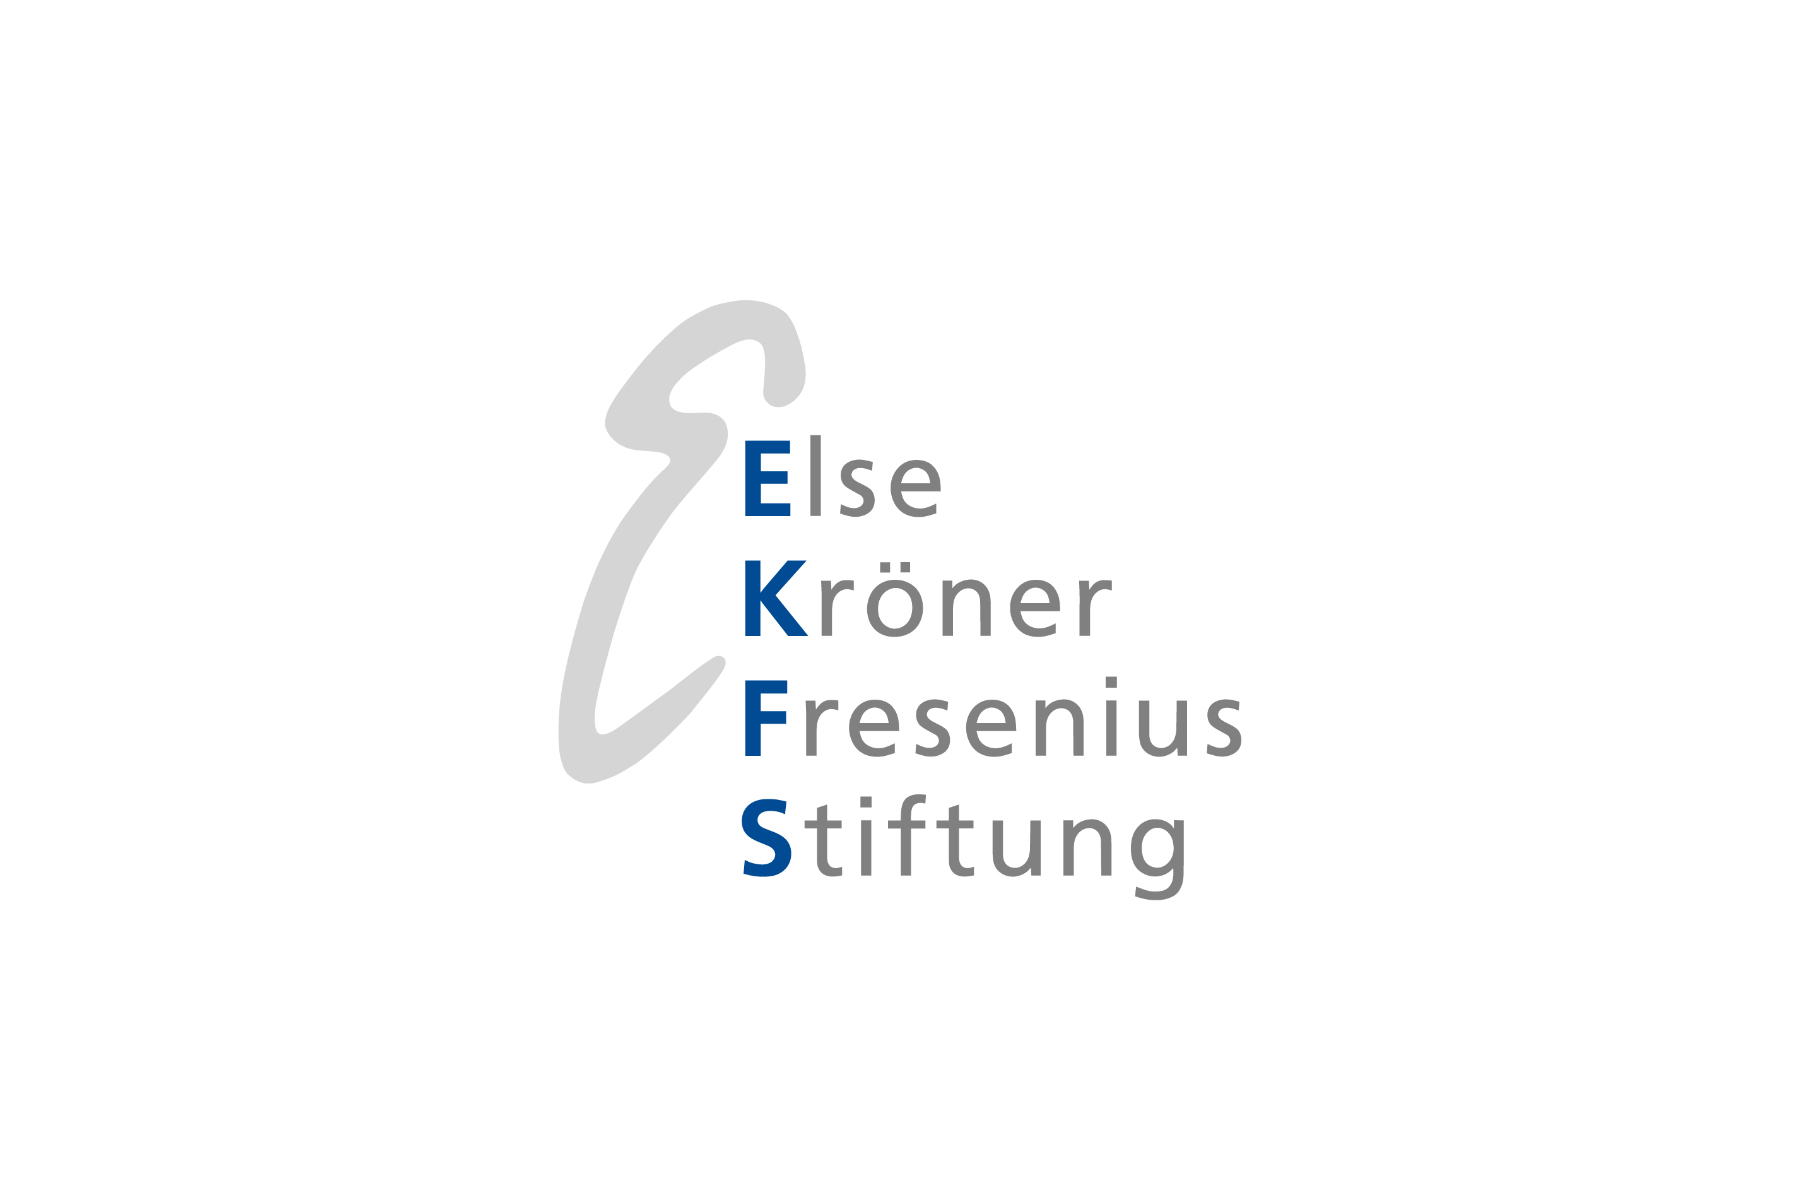 The picture shows the logo of the Else-Krönert-Fresenius Stiftung.